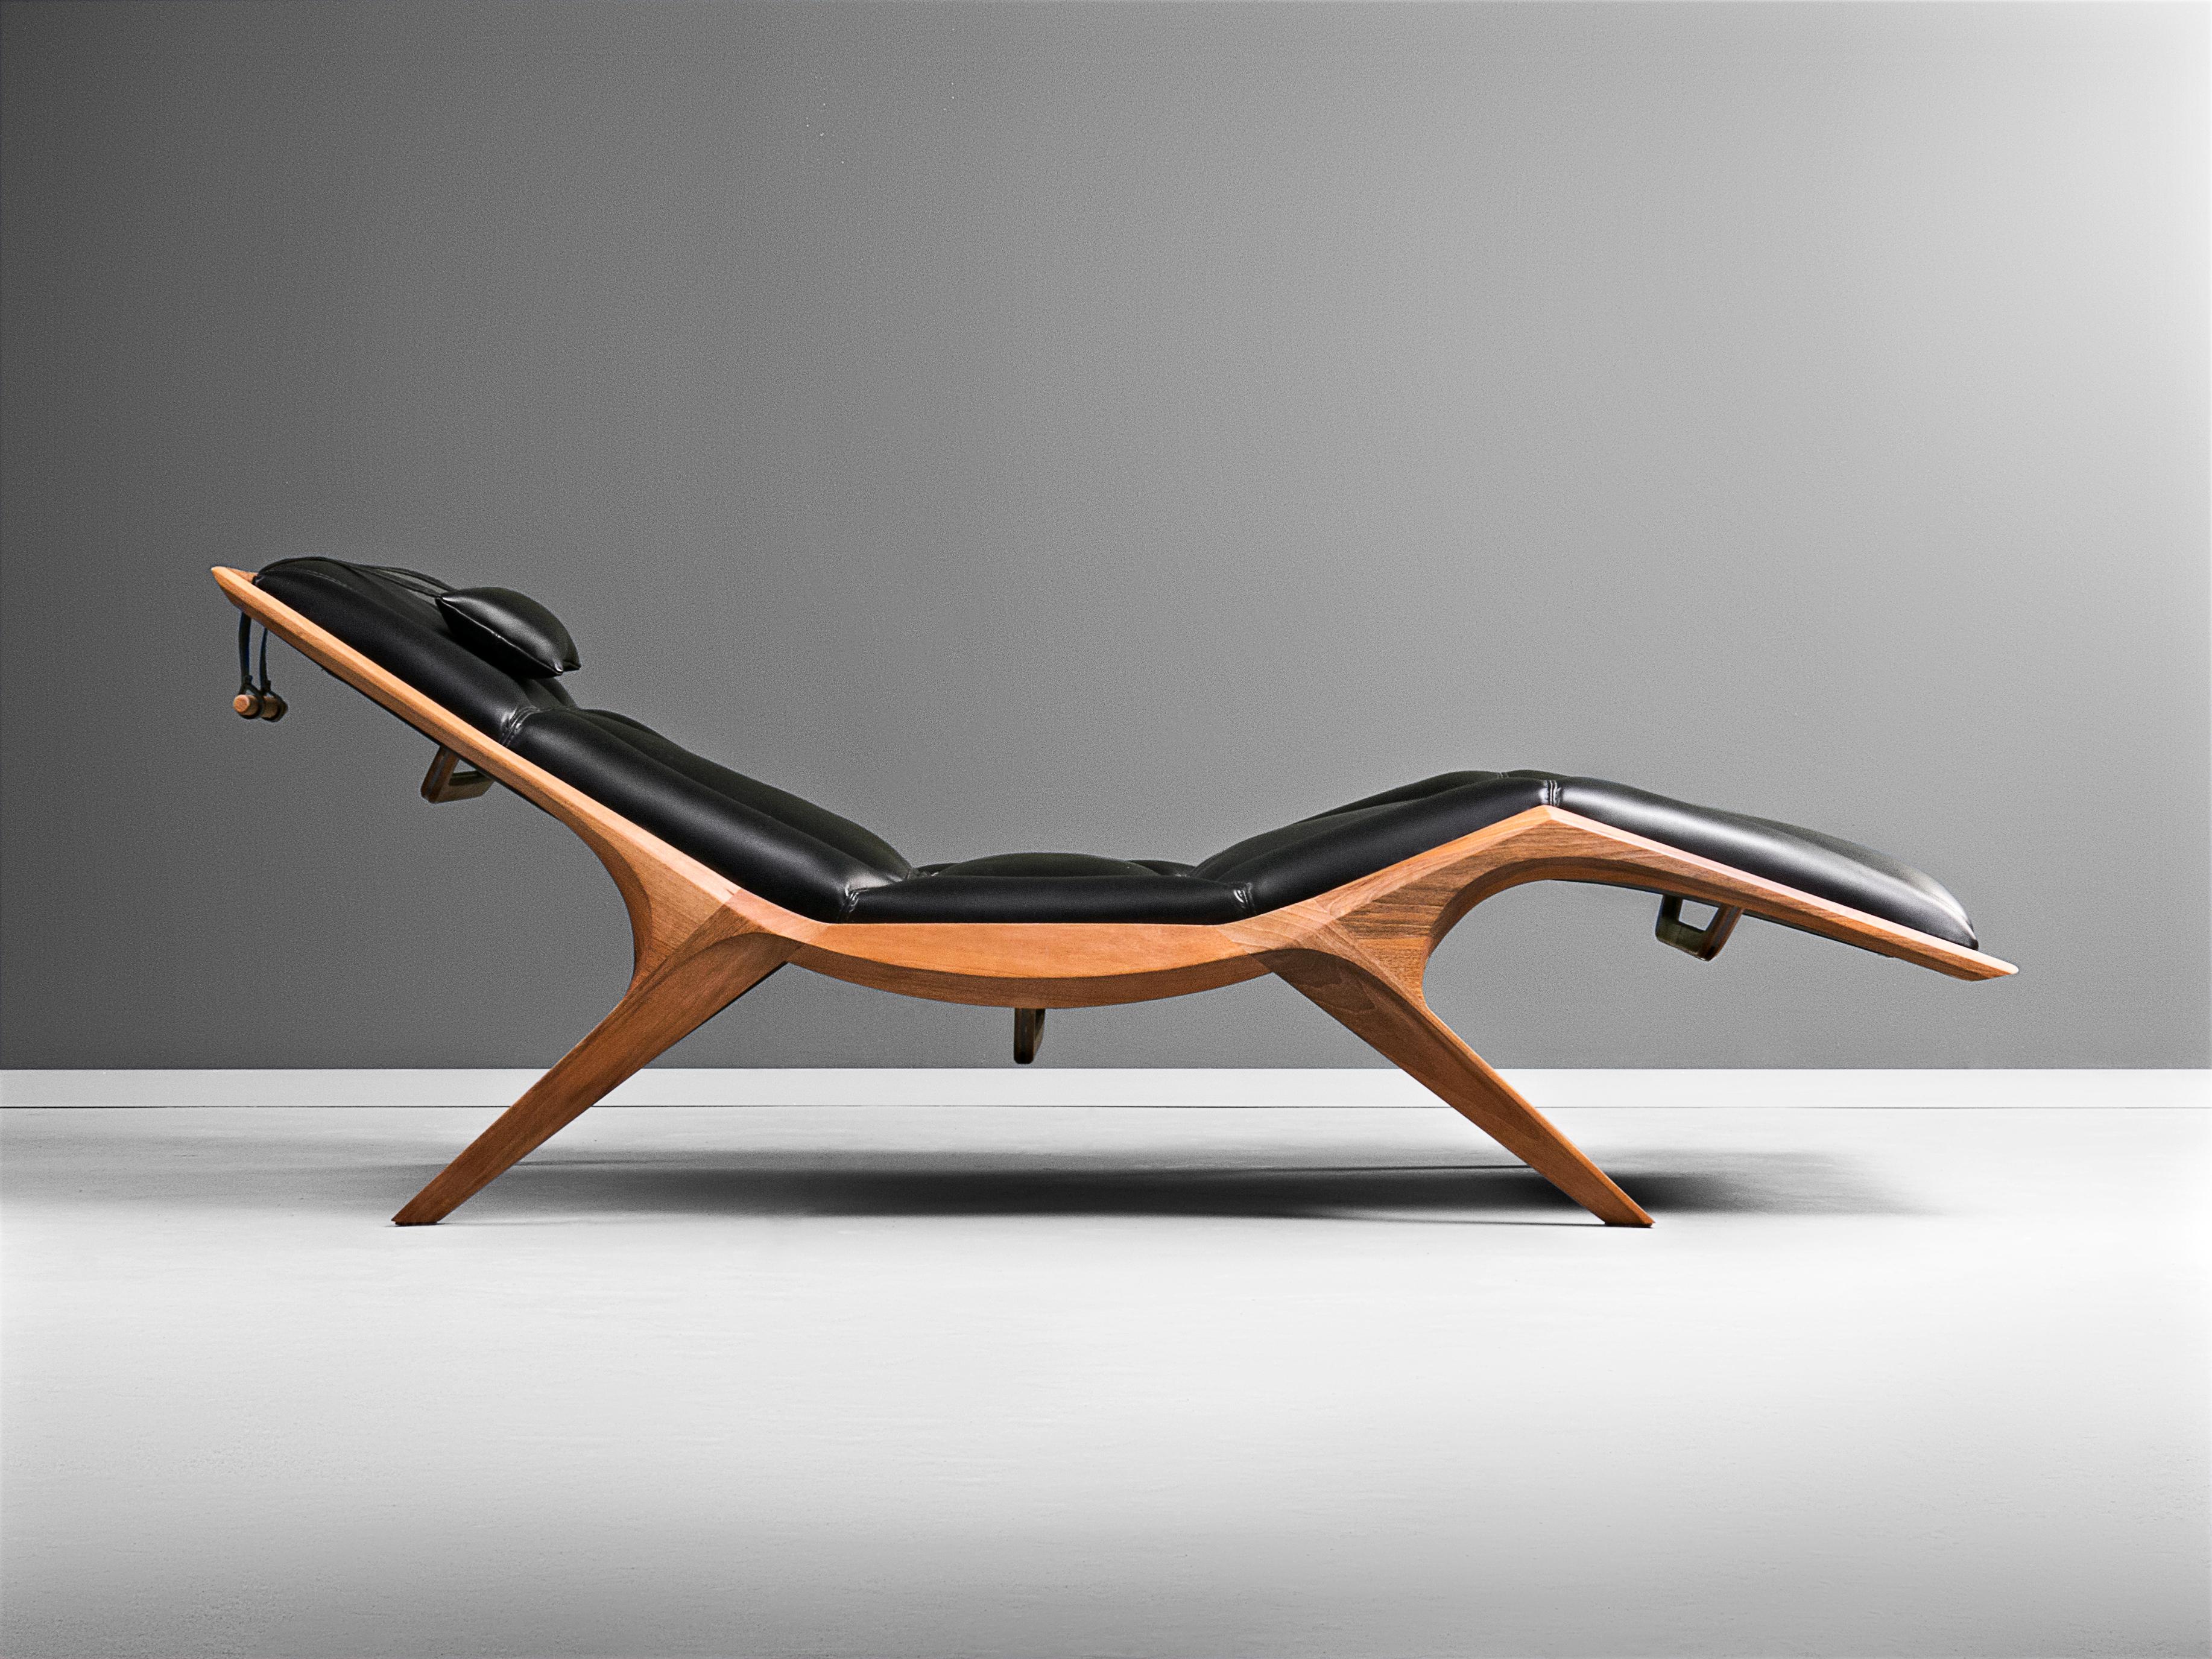 Another one in a series of sculptural organ-like pieces of furniture. With its radial “skeleton” design, a combination of sharp lines and “pumped muscles” of the body, that is, pillows, this deckchair gives the impression of a large INSECT ready to